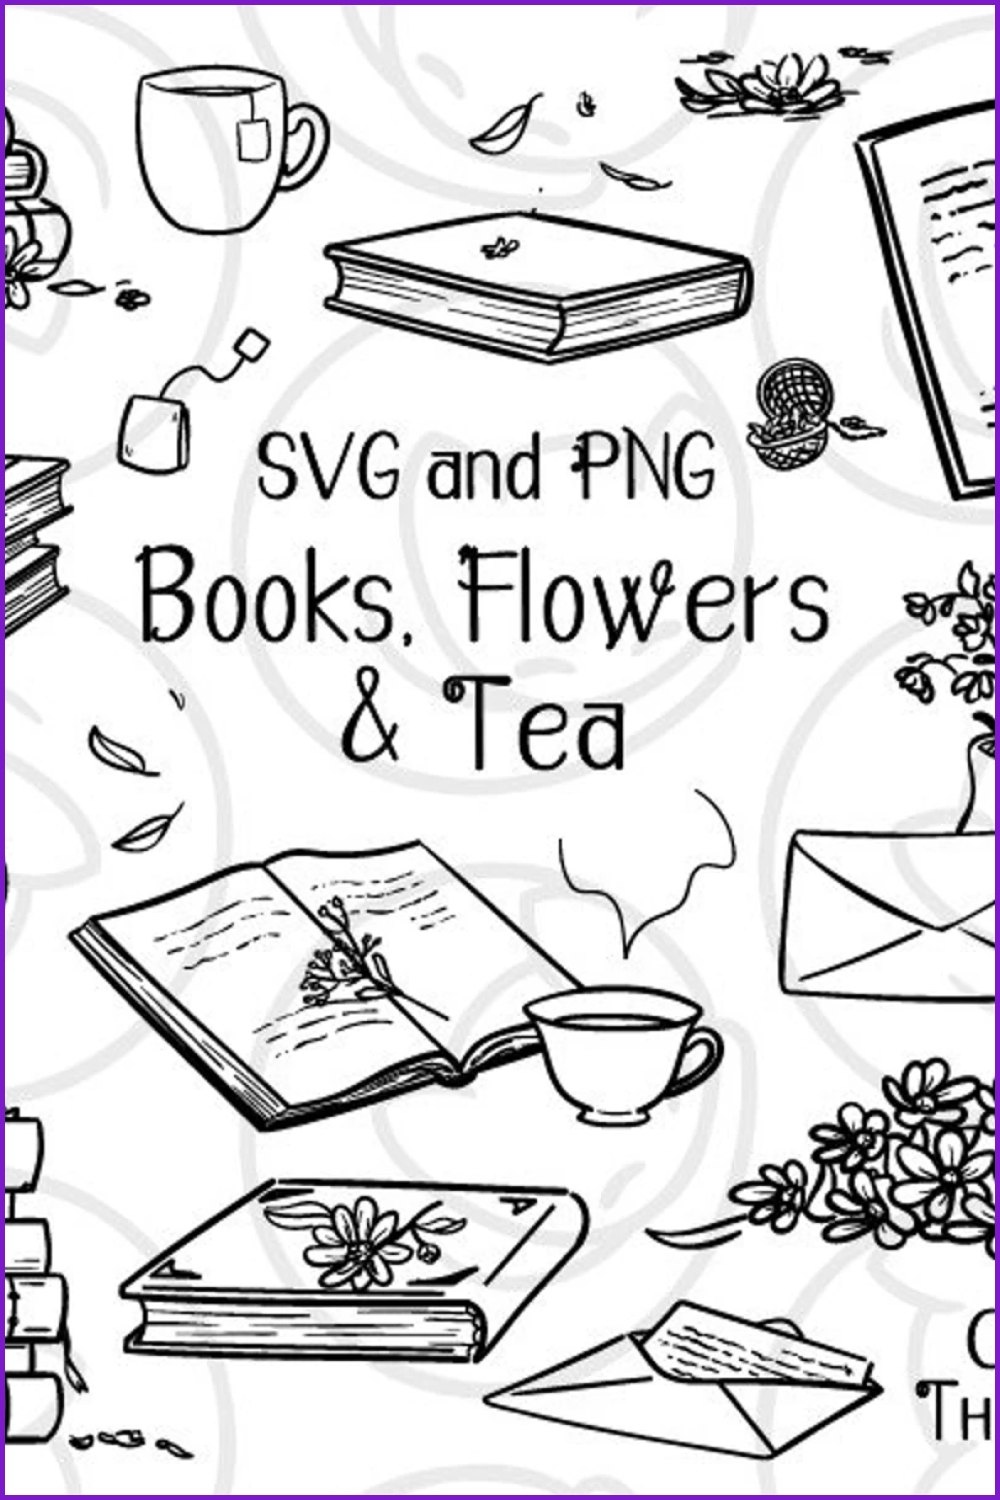 Collage with sketches of books, cups of tea and flowers.